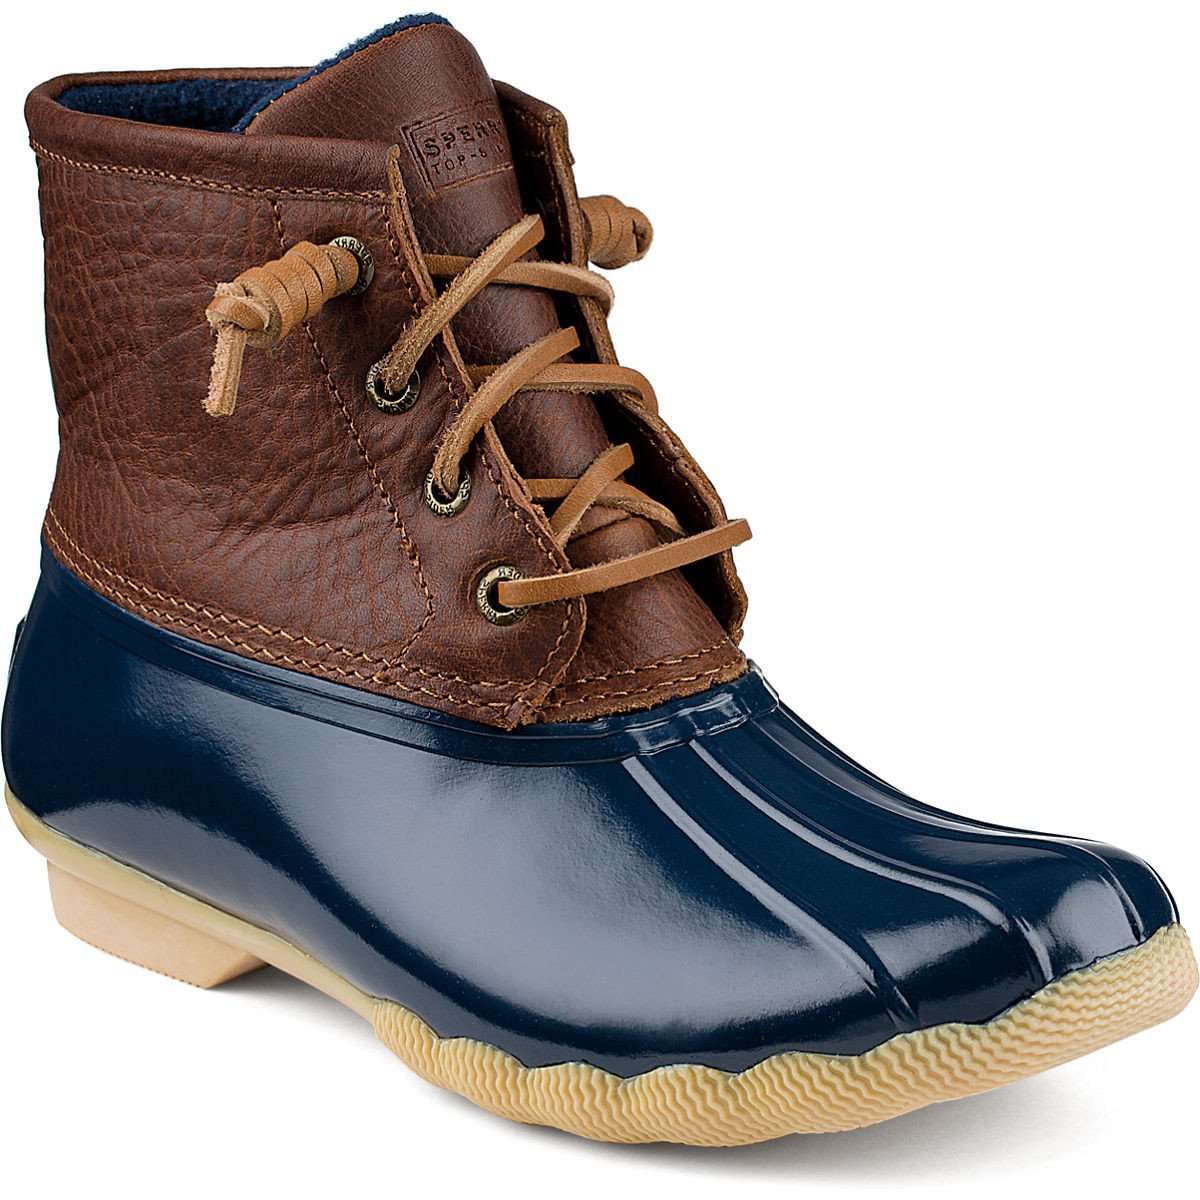 Women's Saltwater Duck Boot in Tan/Navy by Sperry - Country Club Prep